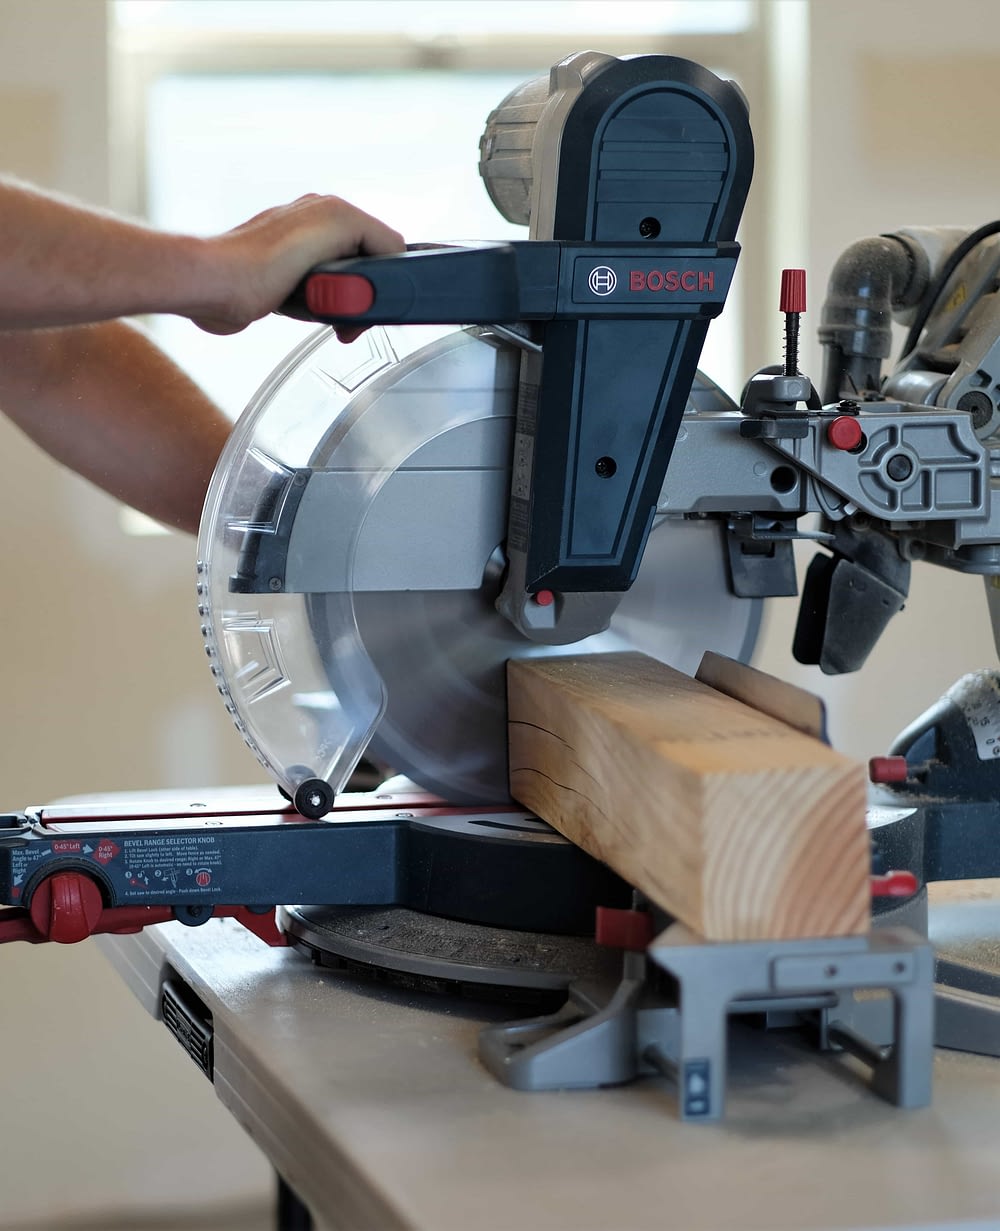 Man using a Bosch Table saw to cut a wood board for a rustic coffee table